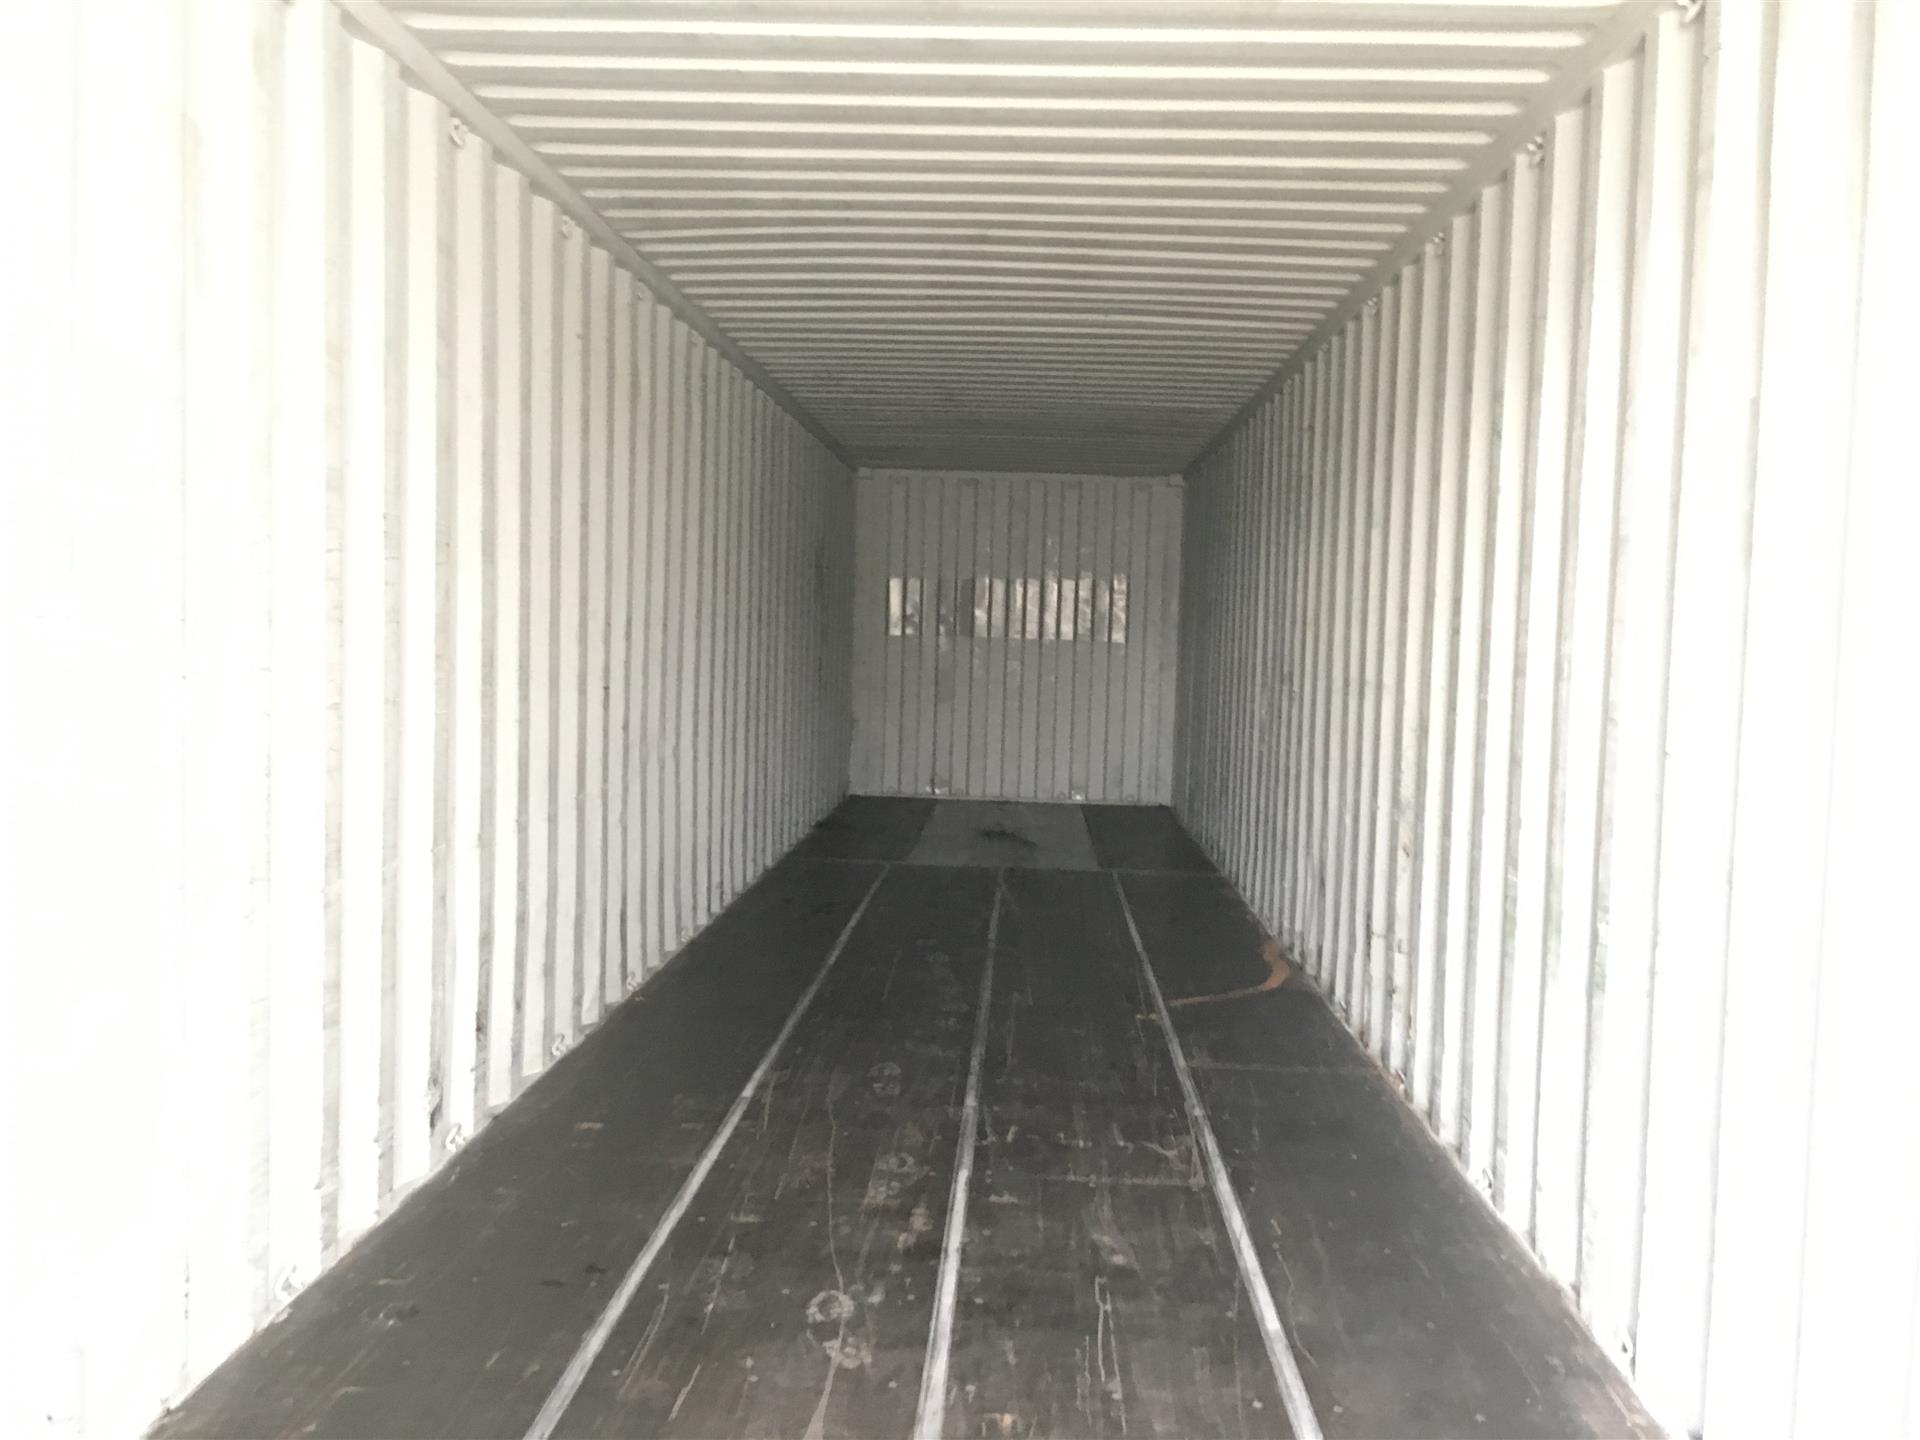 2005 Equipment Leasing Solutions- 20' Container